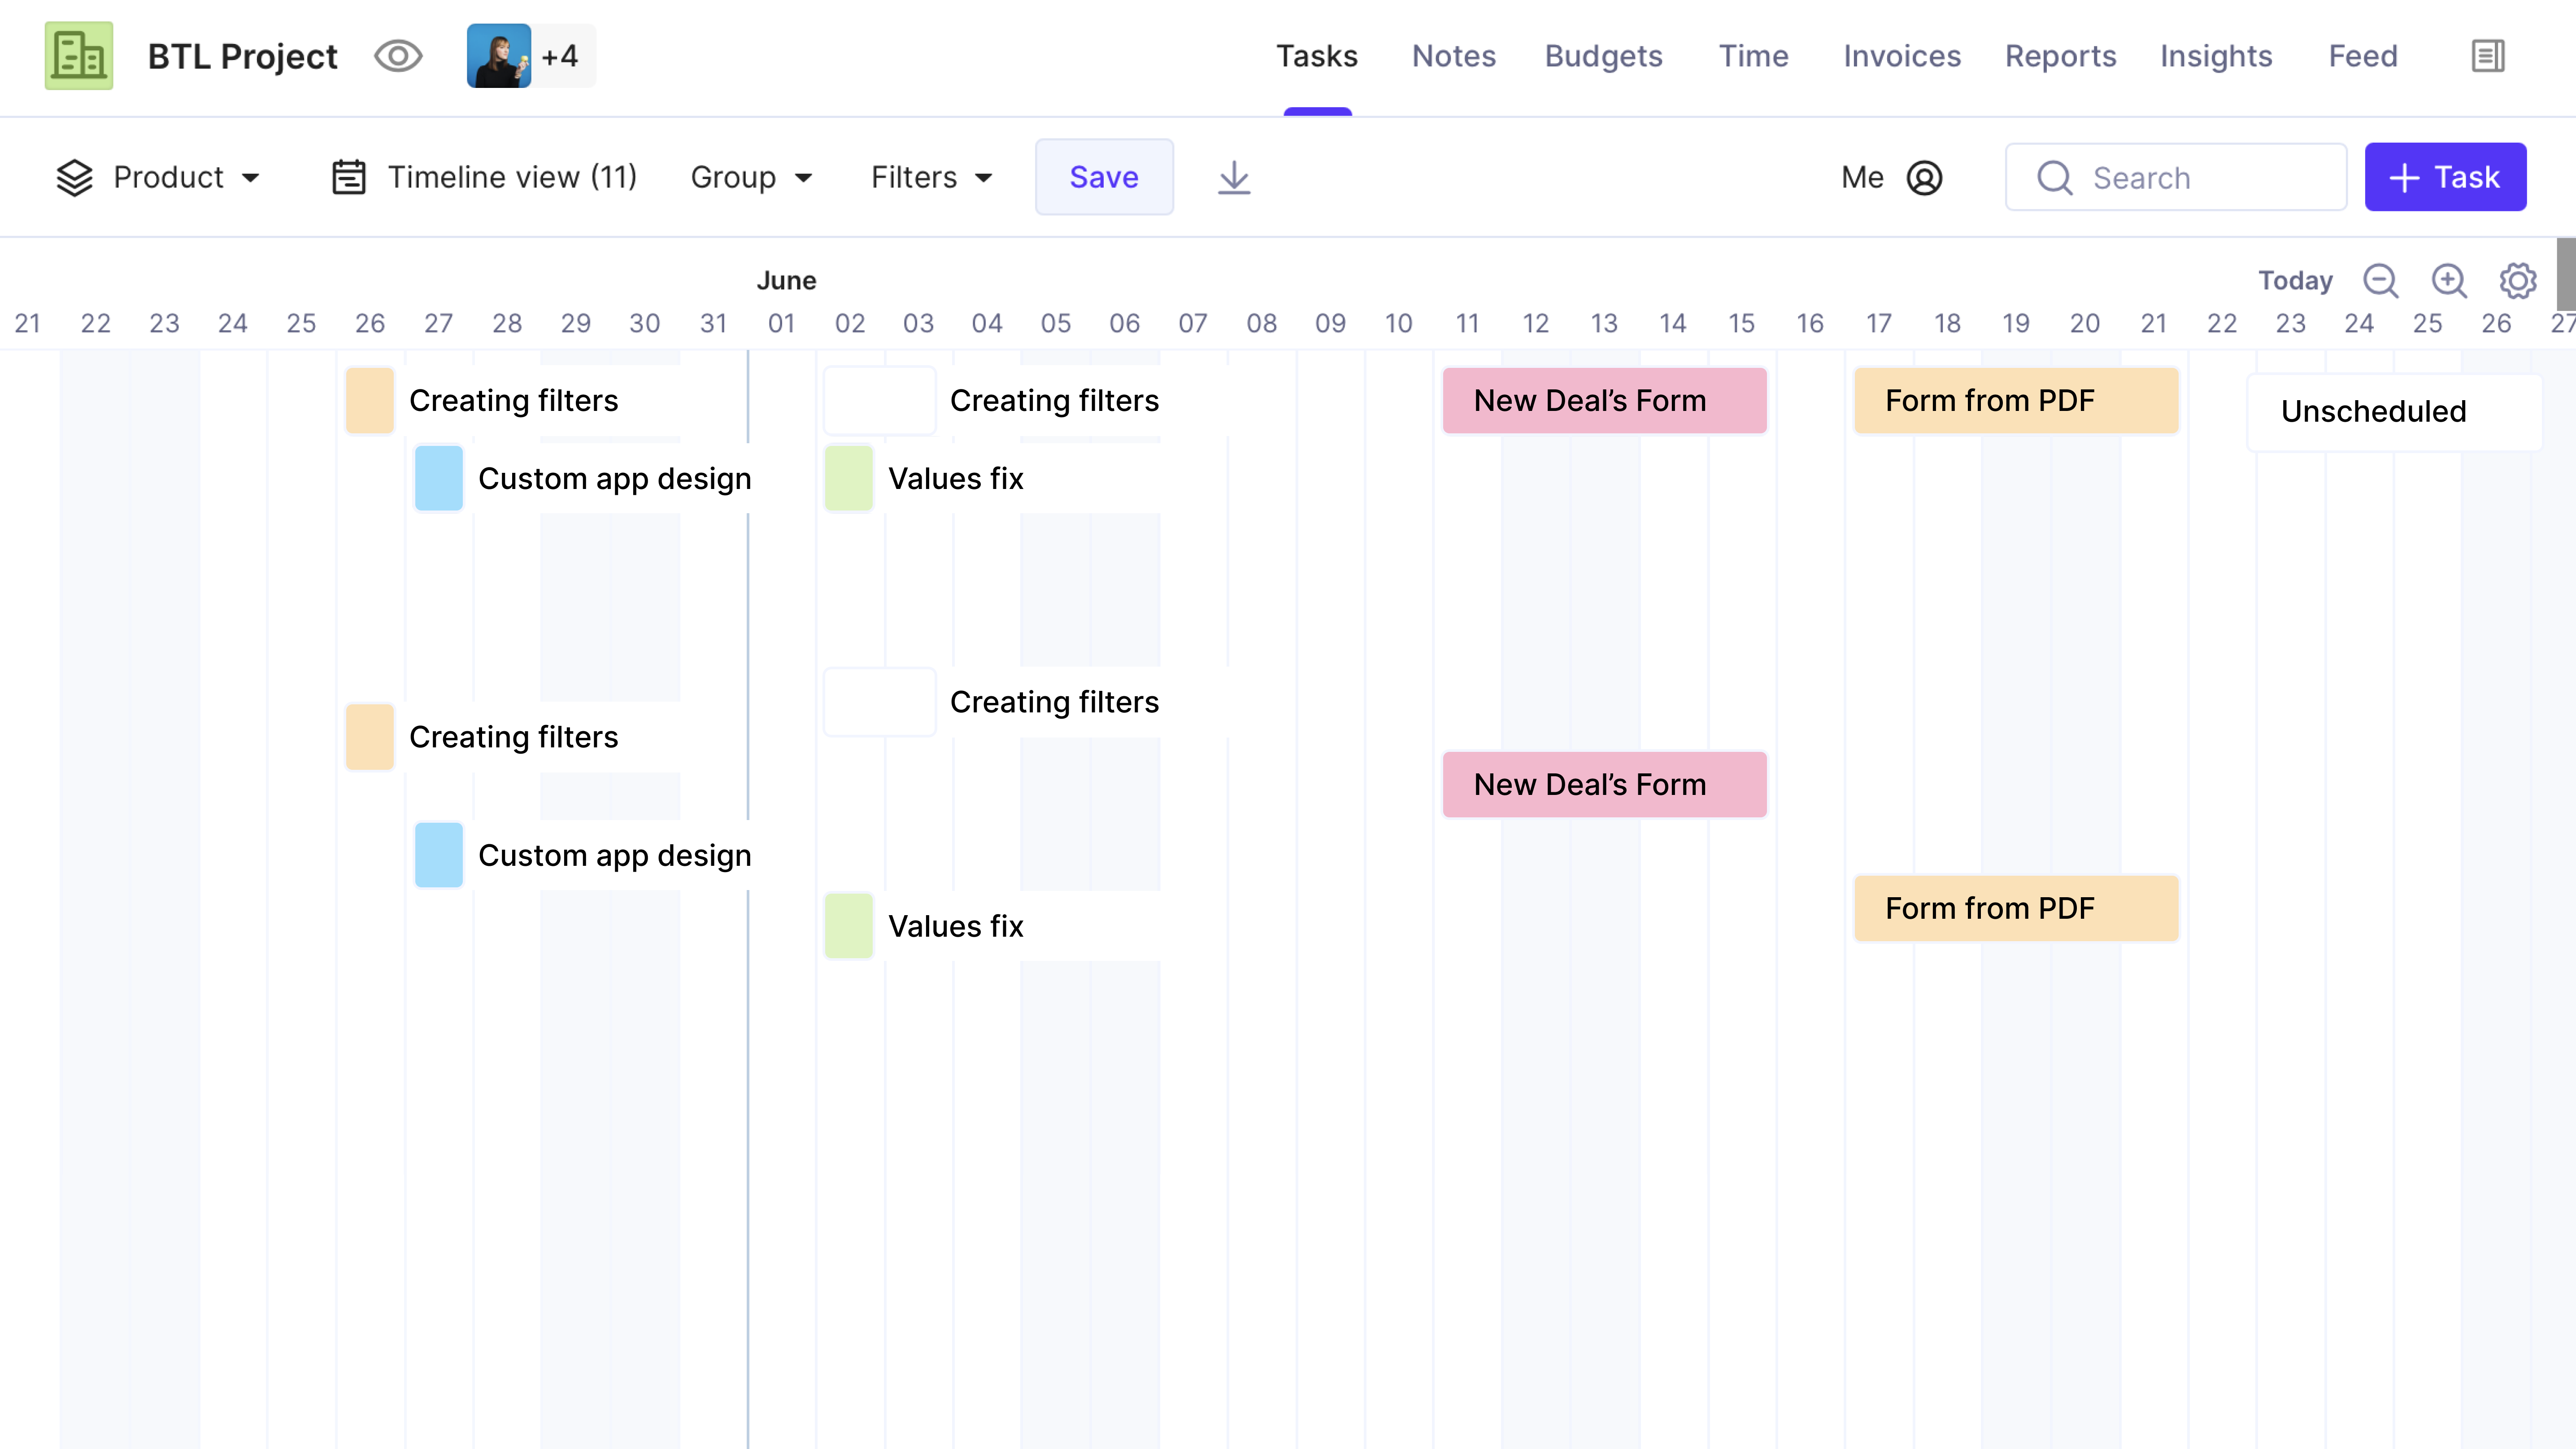 View your scheduled items in a timeline. Collaborate with teammates on tasks in real-time, streamline best practices, and let clients in on progress.